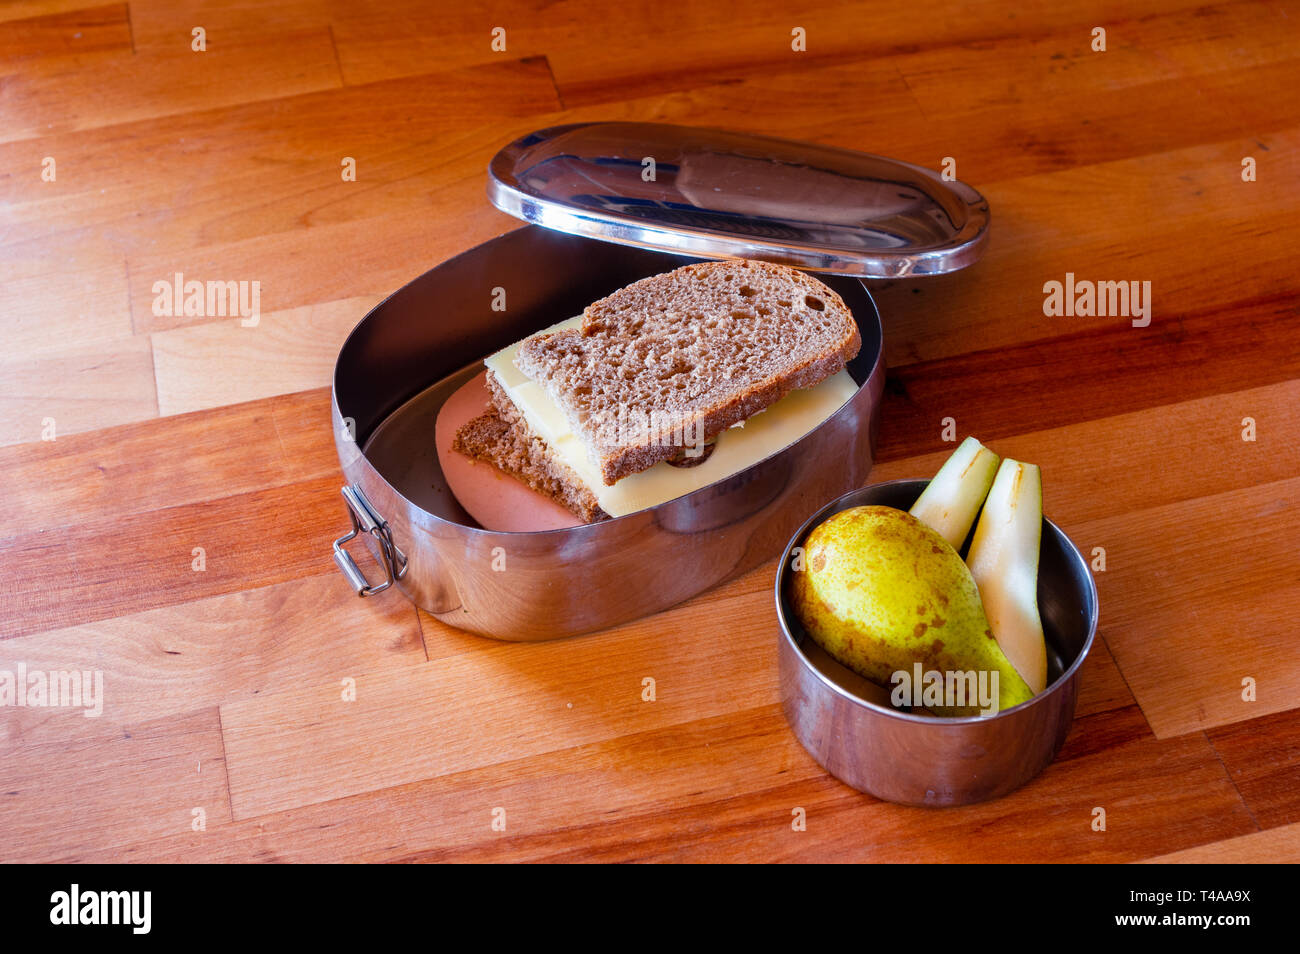 school lunch packed in stainless steel lunchbox on wooden surface Stock Photo